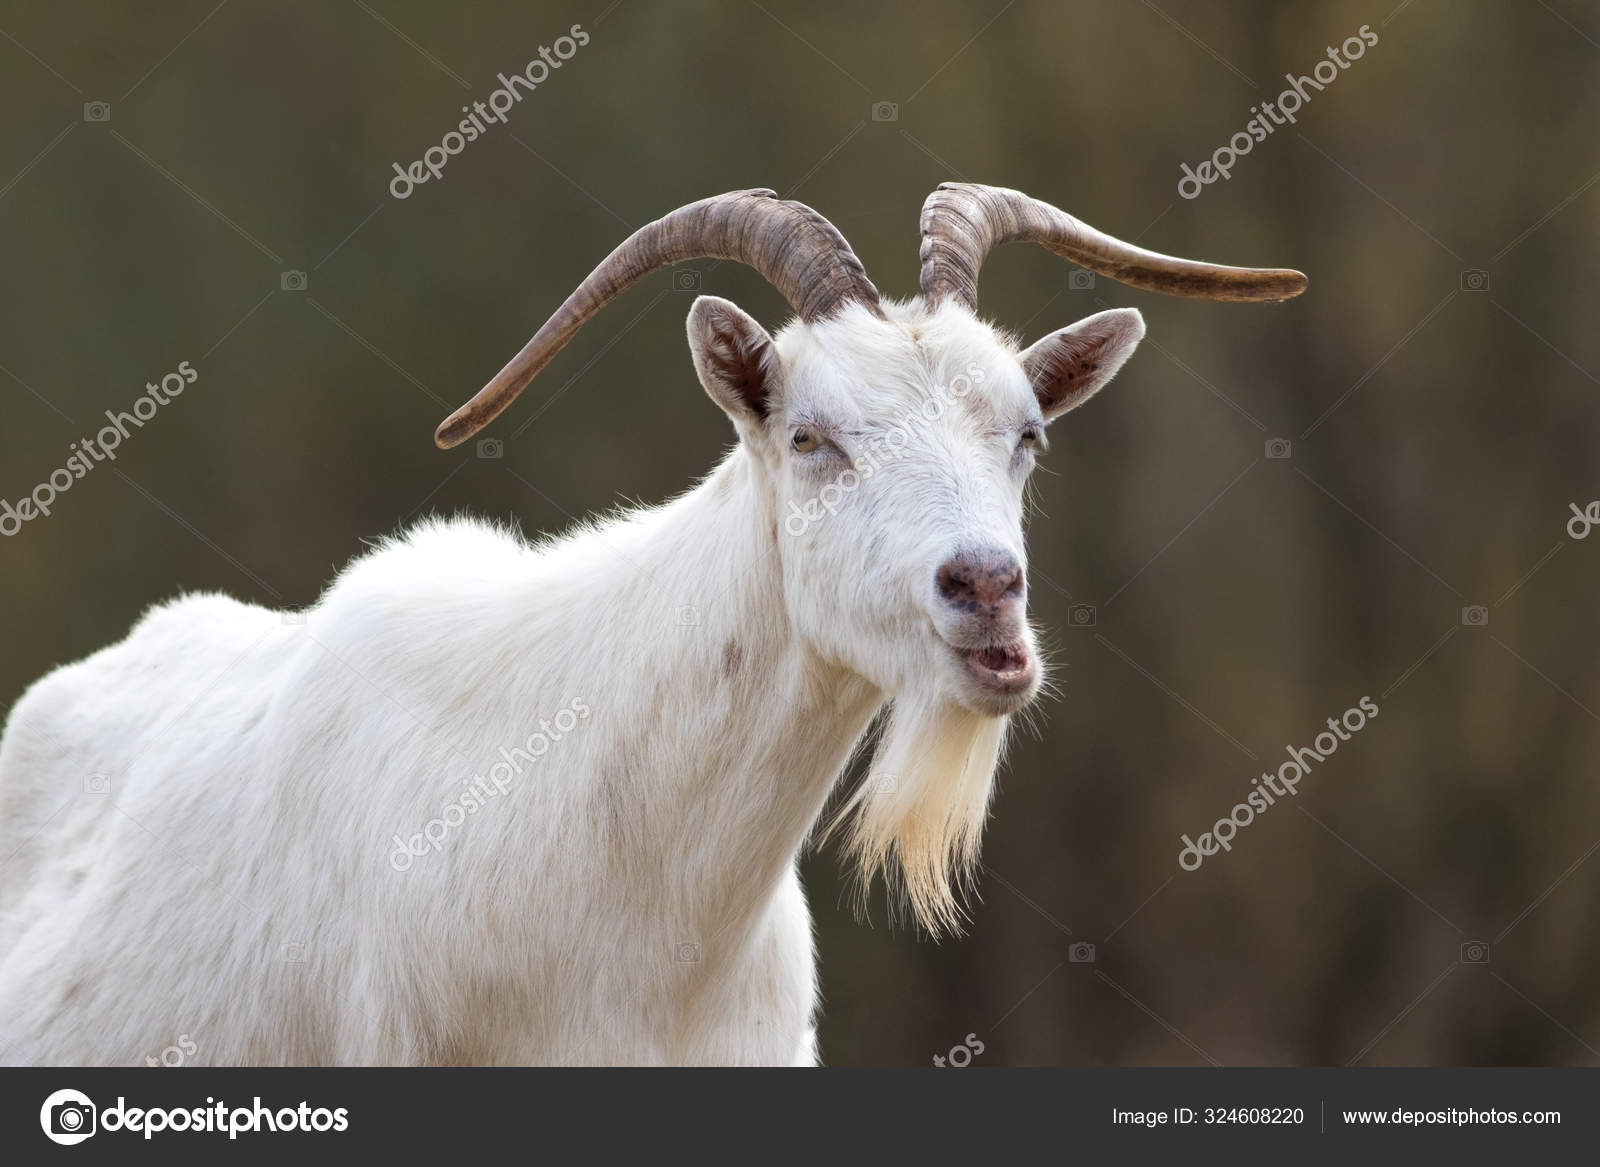 White Horned Funny Goat With Beard Stock Photo Image By C Gezafarkas 324608220